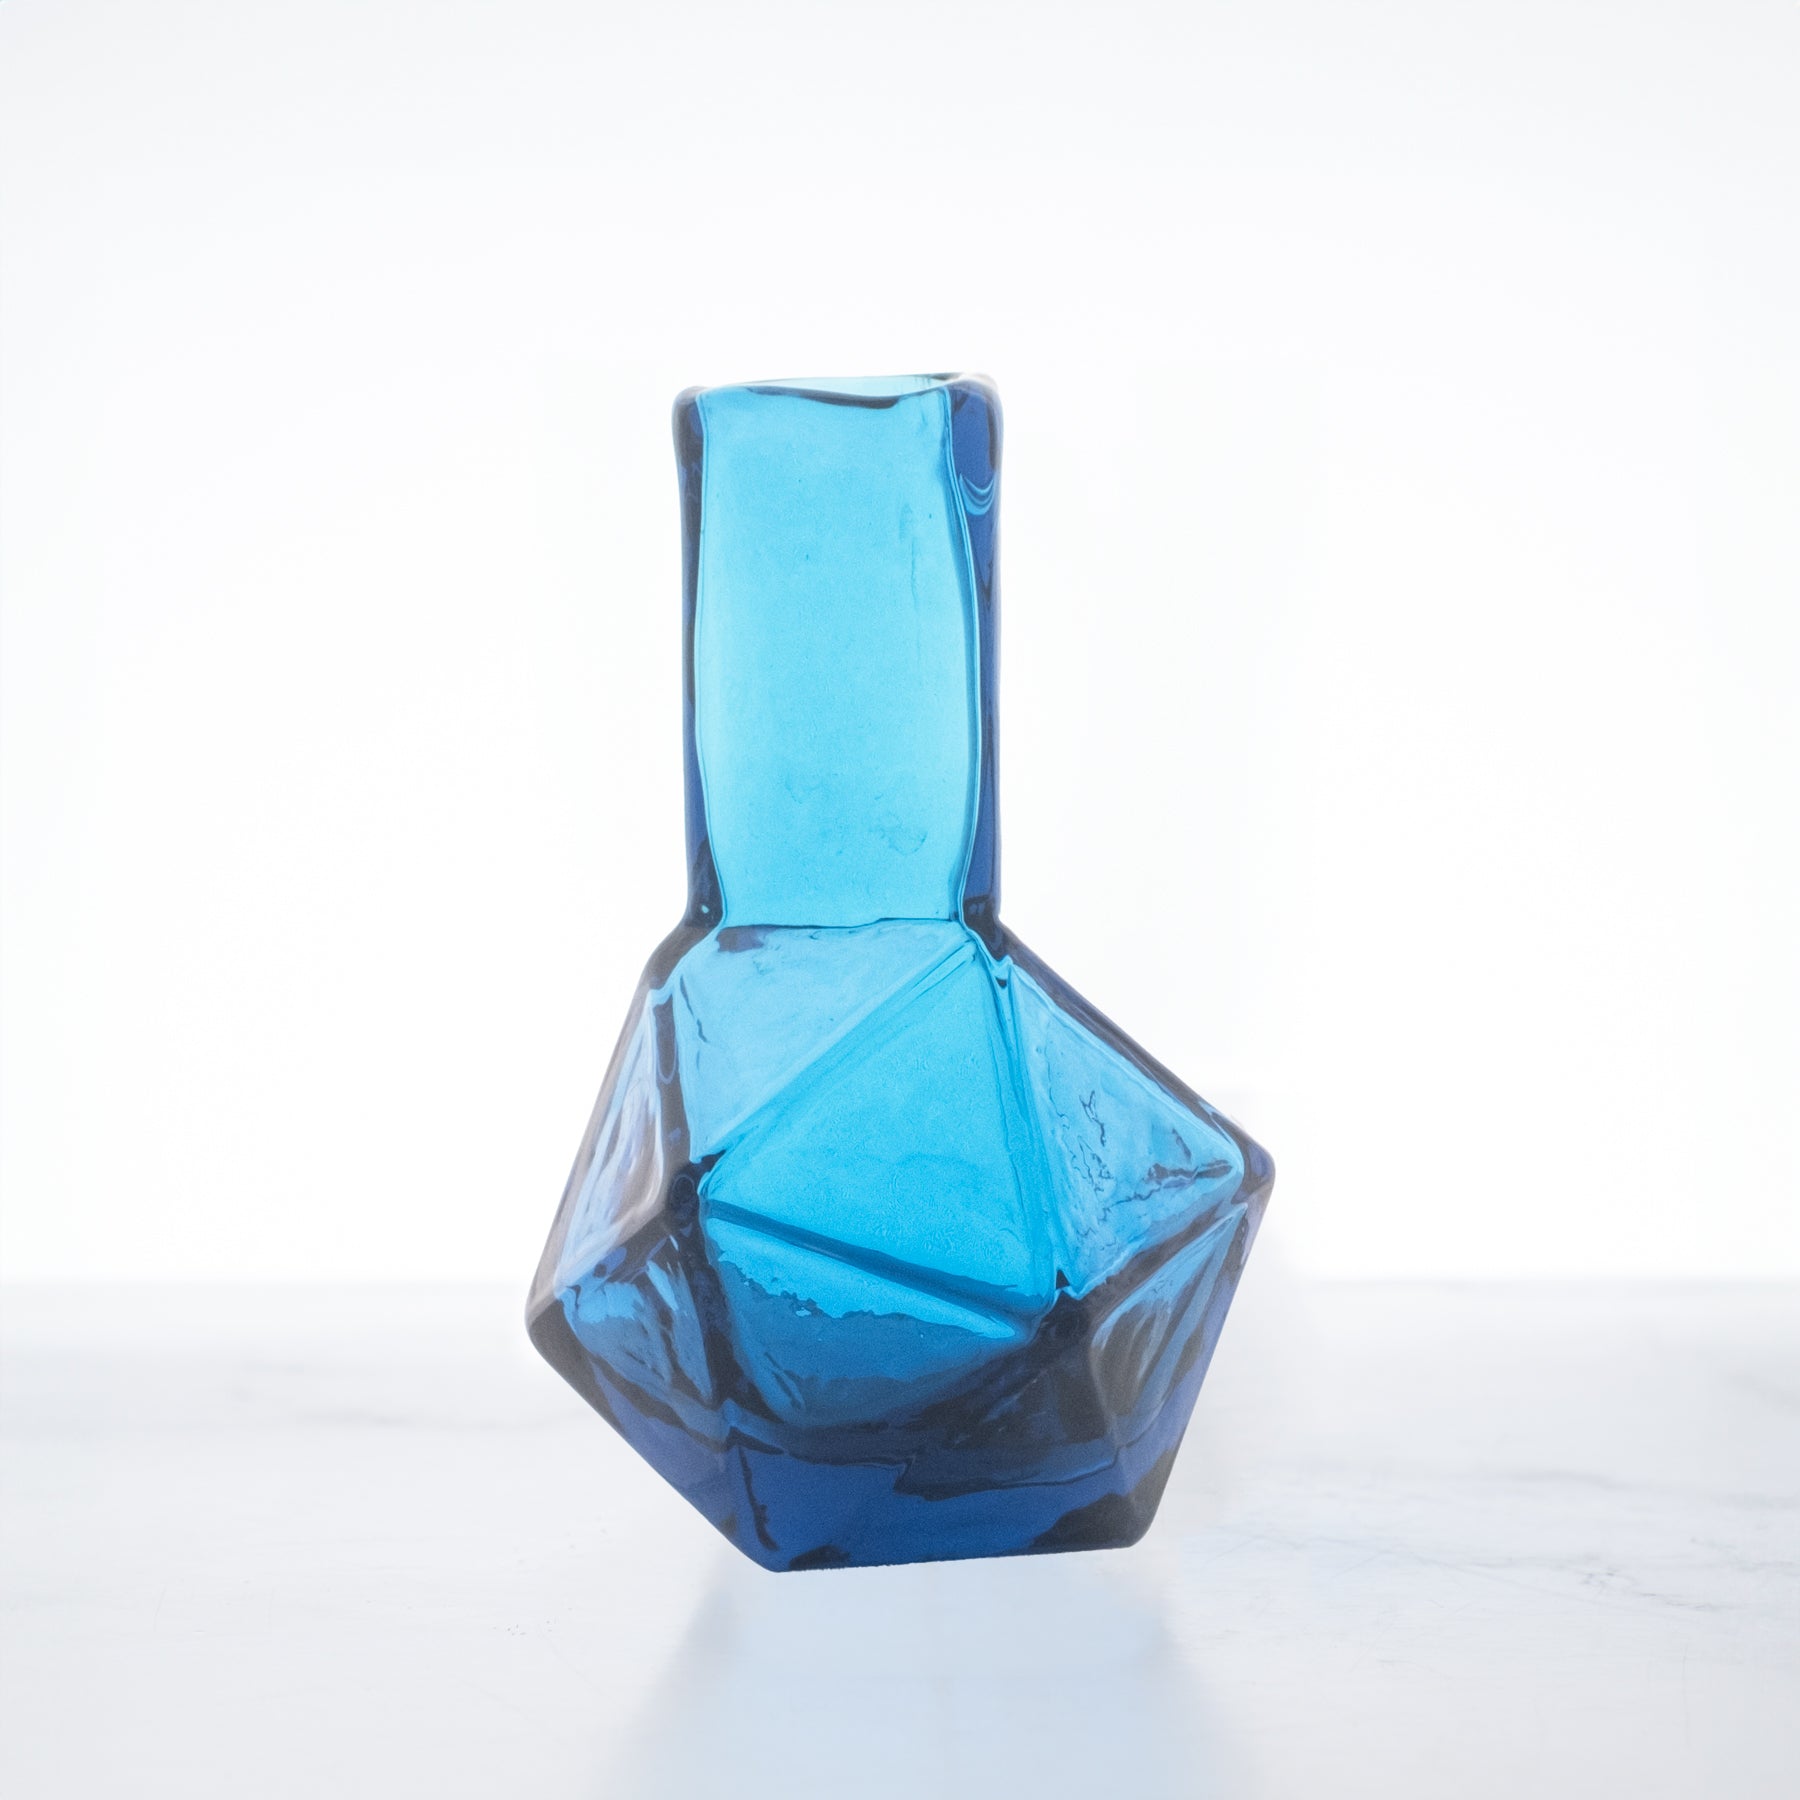 2412 D20 Dice Tower Bud Vase - Turquoise